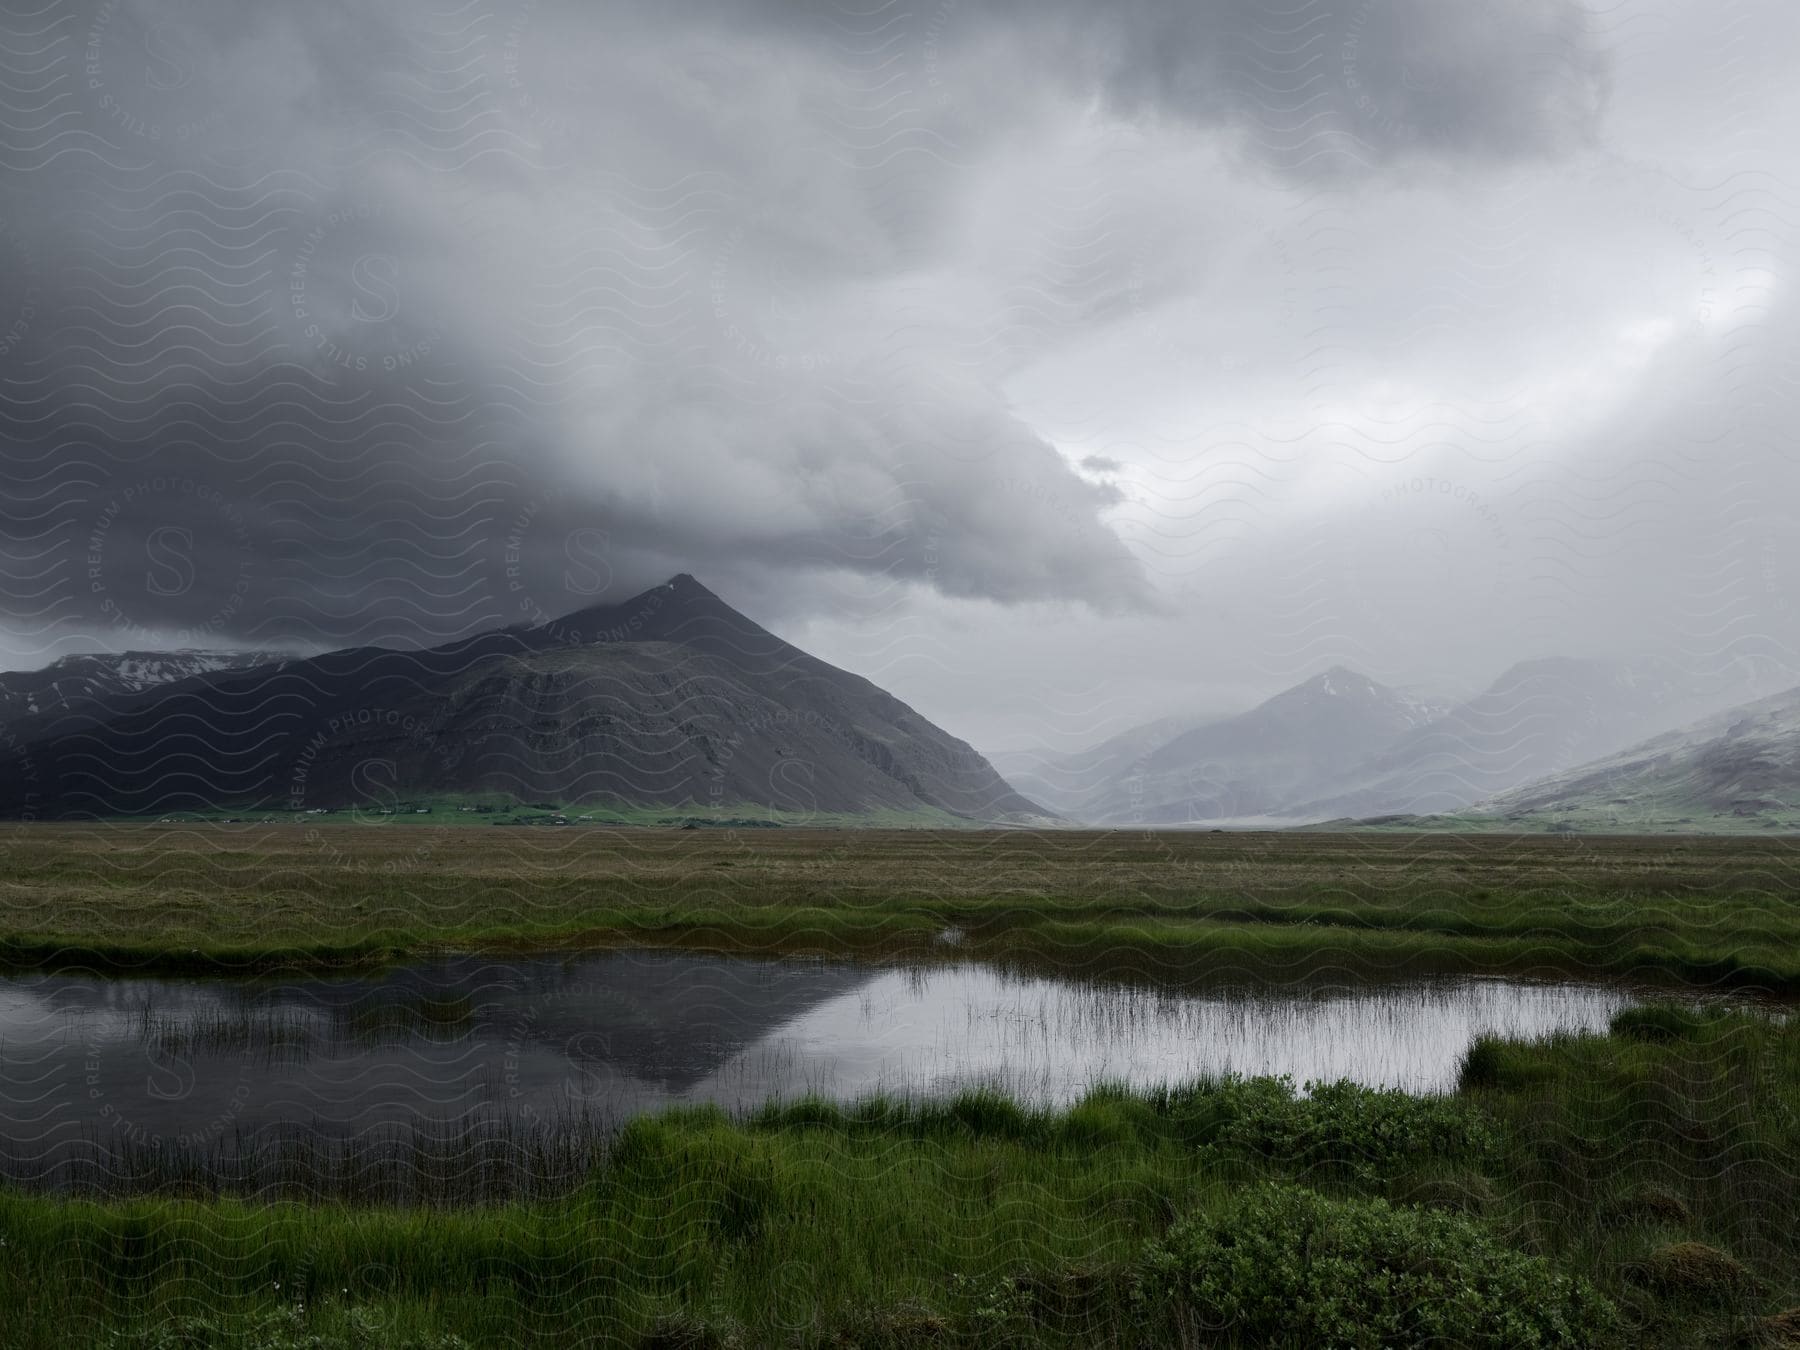 A dark cloud hovers over a mountain while a lush green grassland stretches out in the foreground with a small lake adding to the scenery